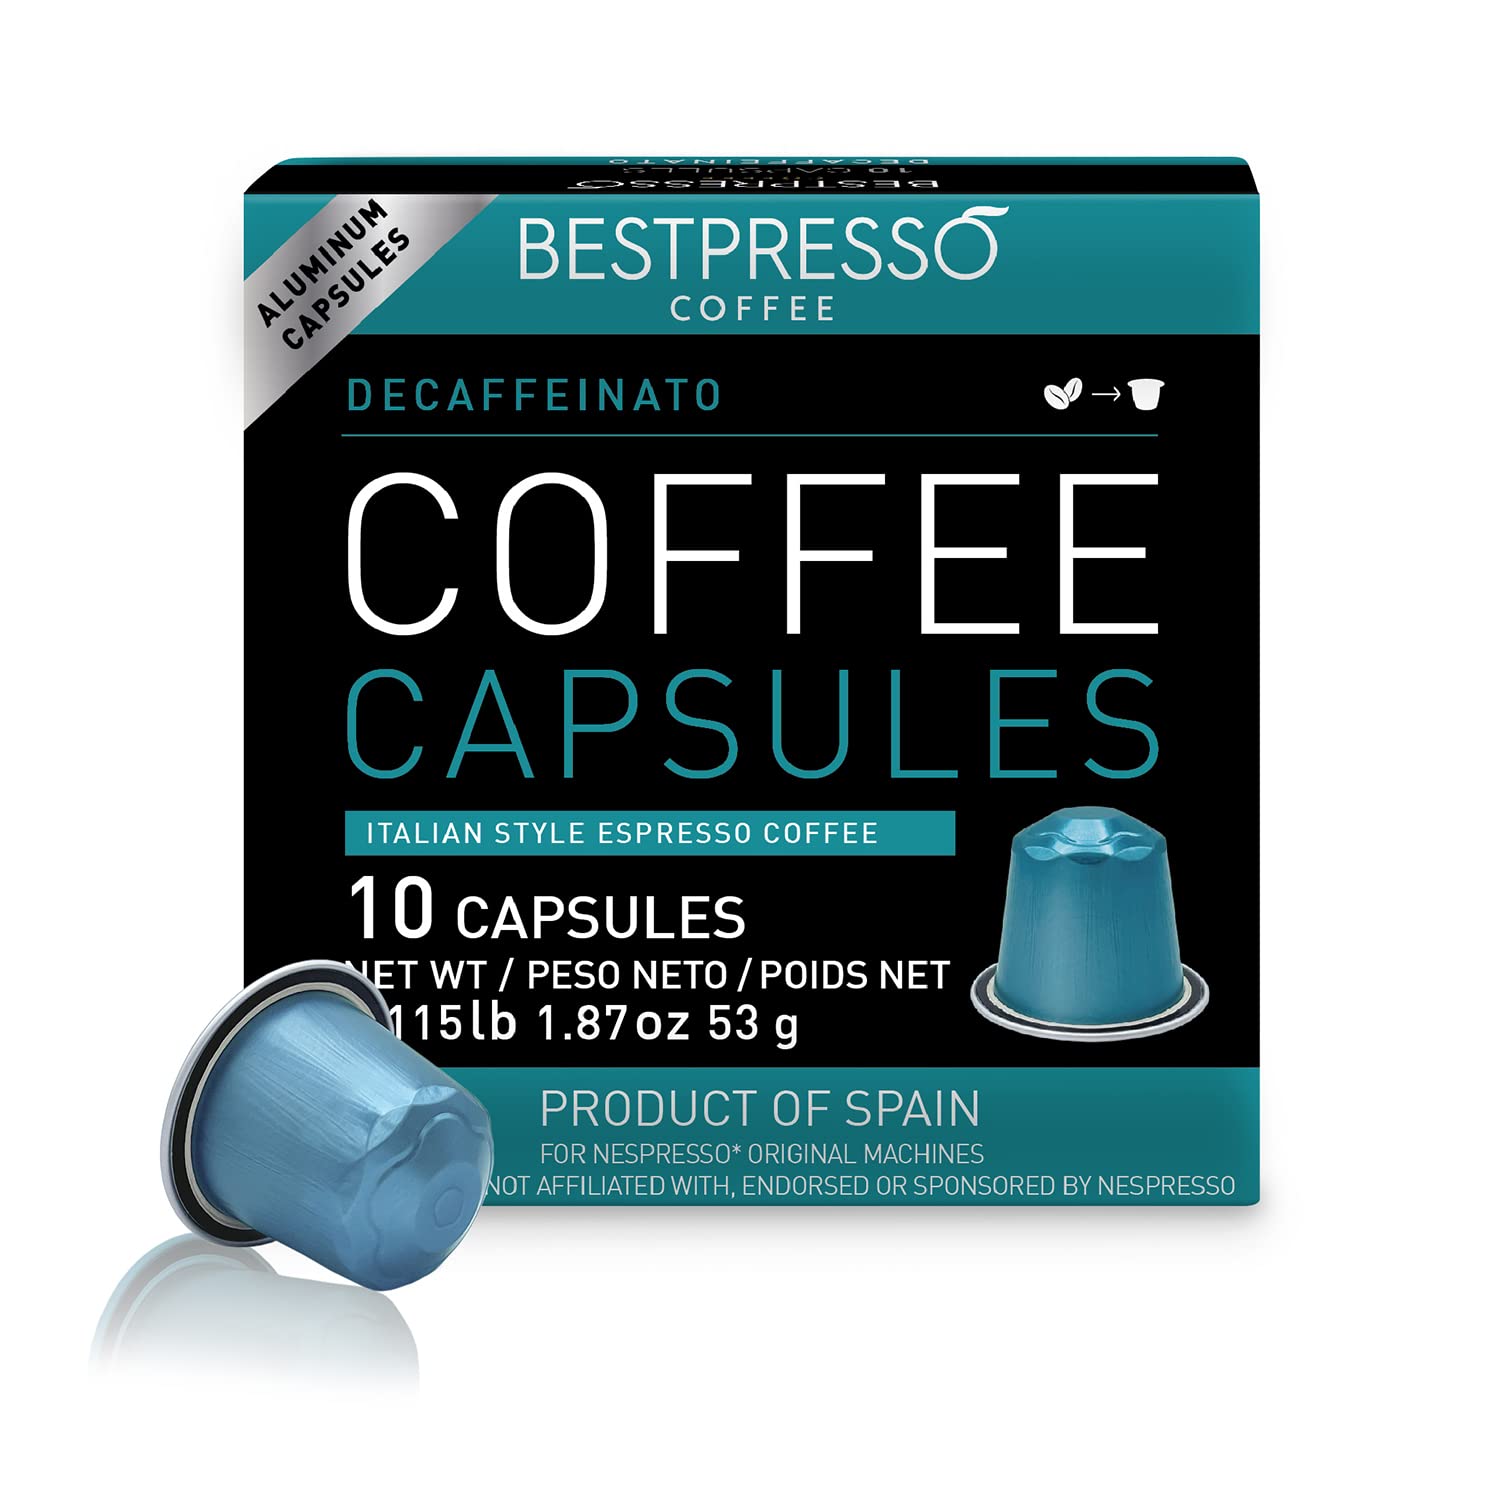 I love coffee, so I am also on the hunt for a deal. I purchased these with low expectations, but this is a solid espresso at a great price point. Nothing fancy, but none of my pods have been smashed, and they have all worked.